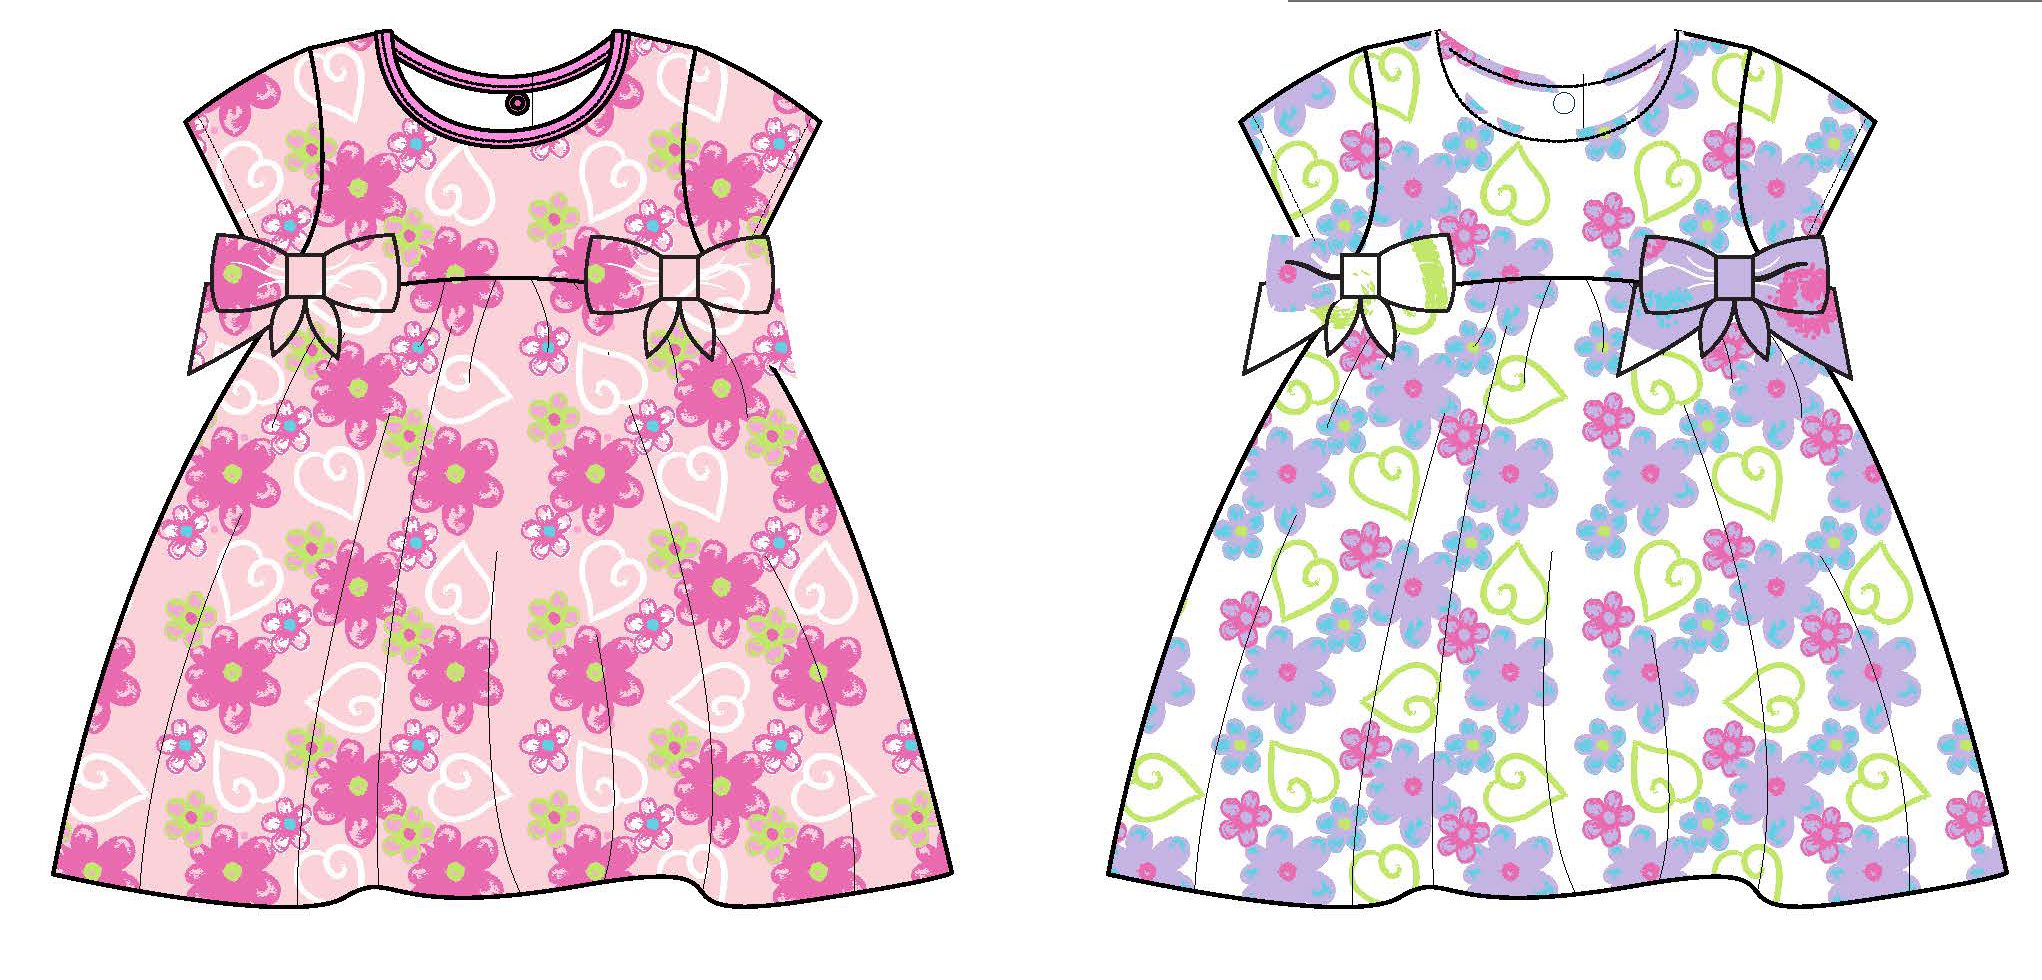 Toddler Girl's Sleeveless Knit DRESS w/ Embroidered Ribbon Bows -Flower & Heart Print - Size 2T-4T